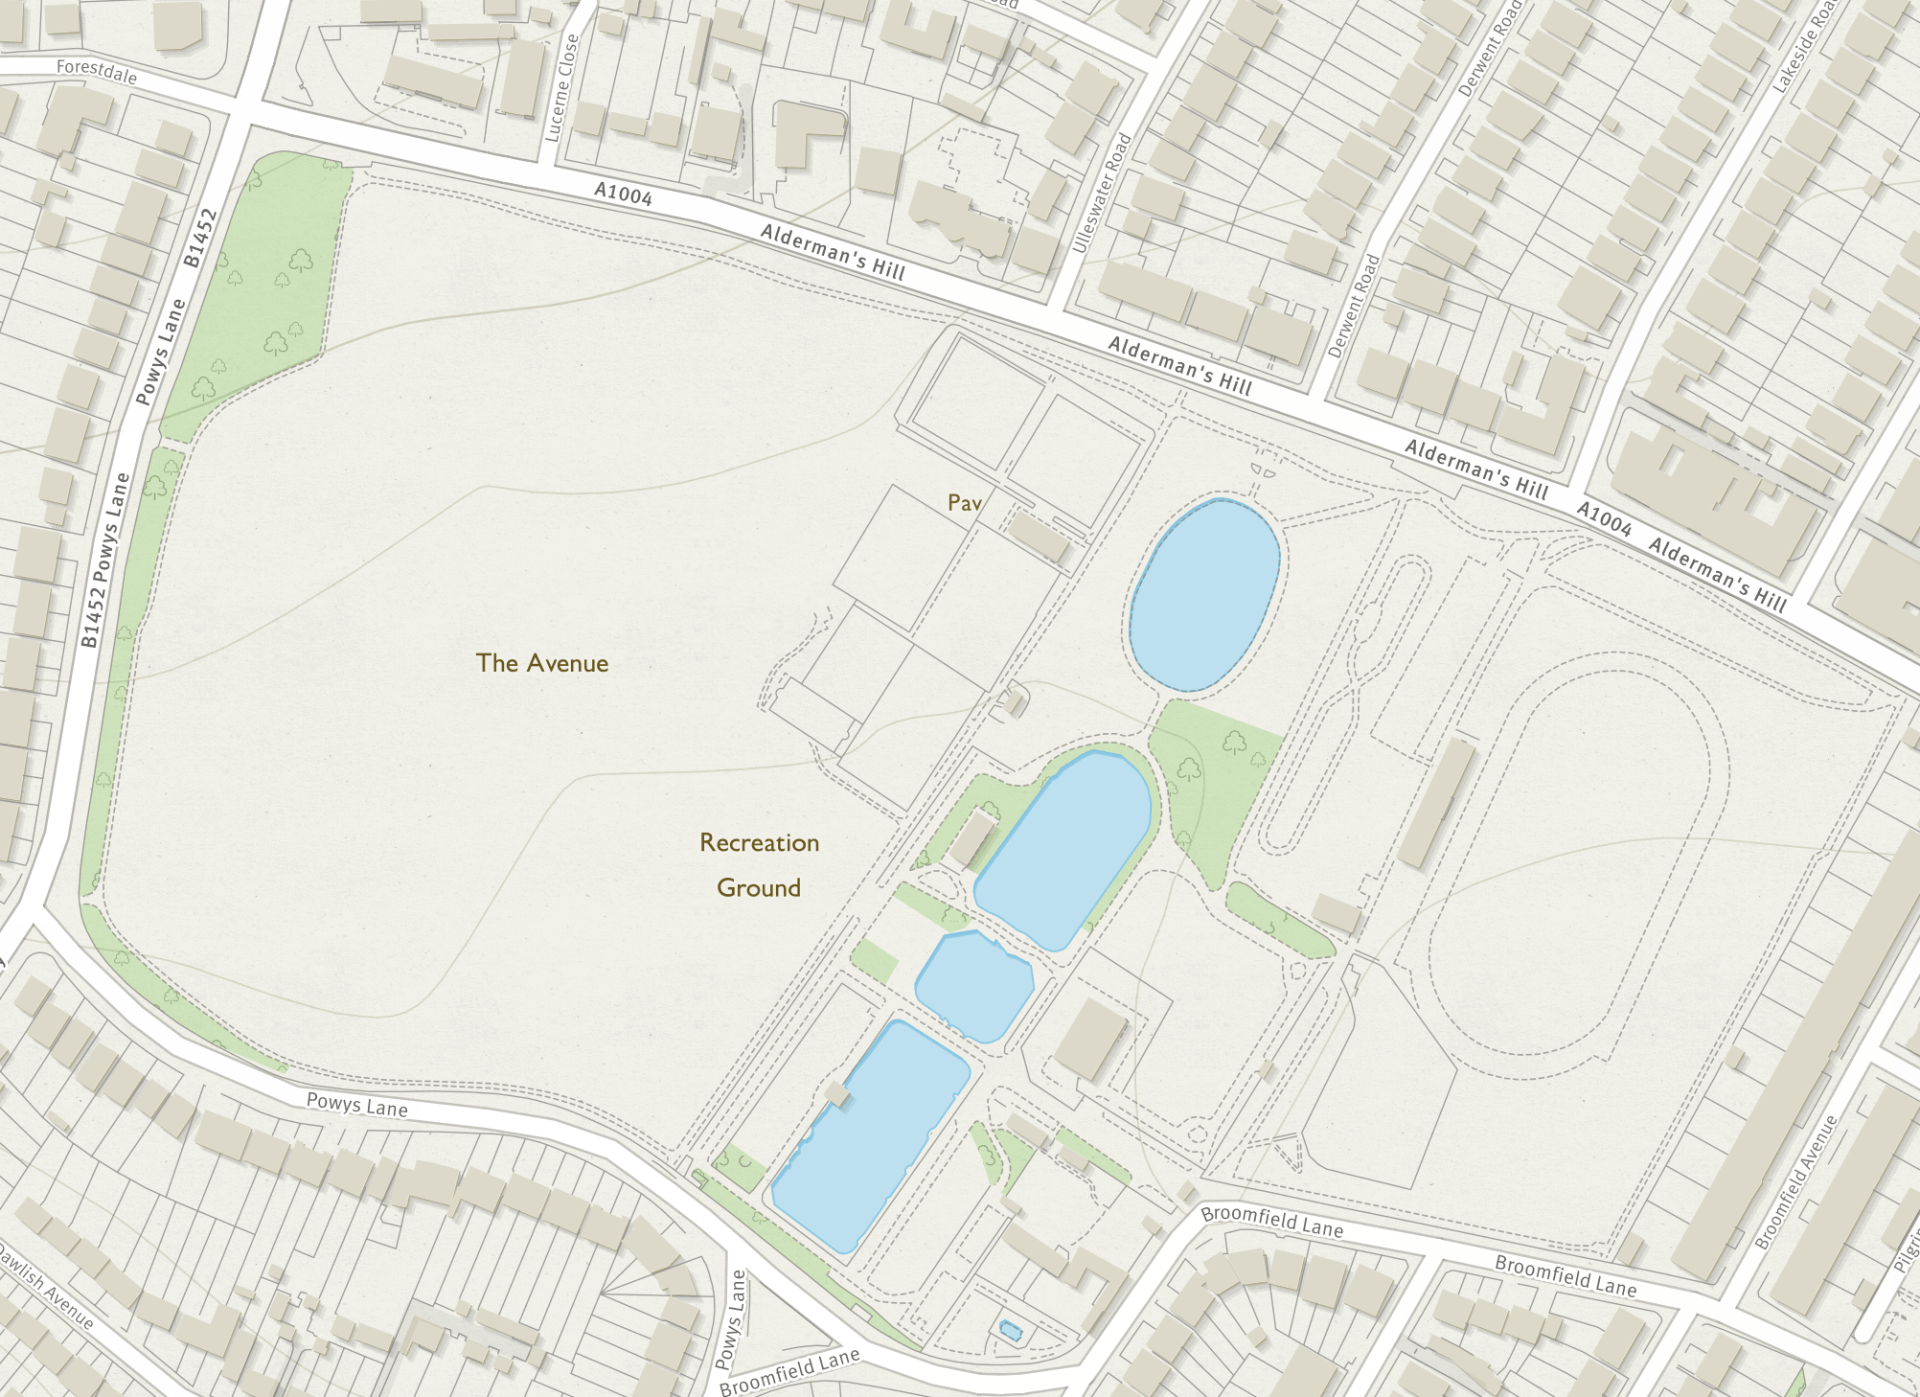 A map of a park with a lot of buildings and ponds